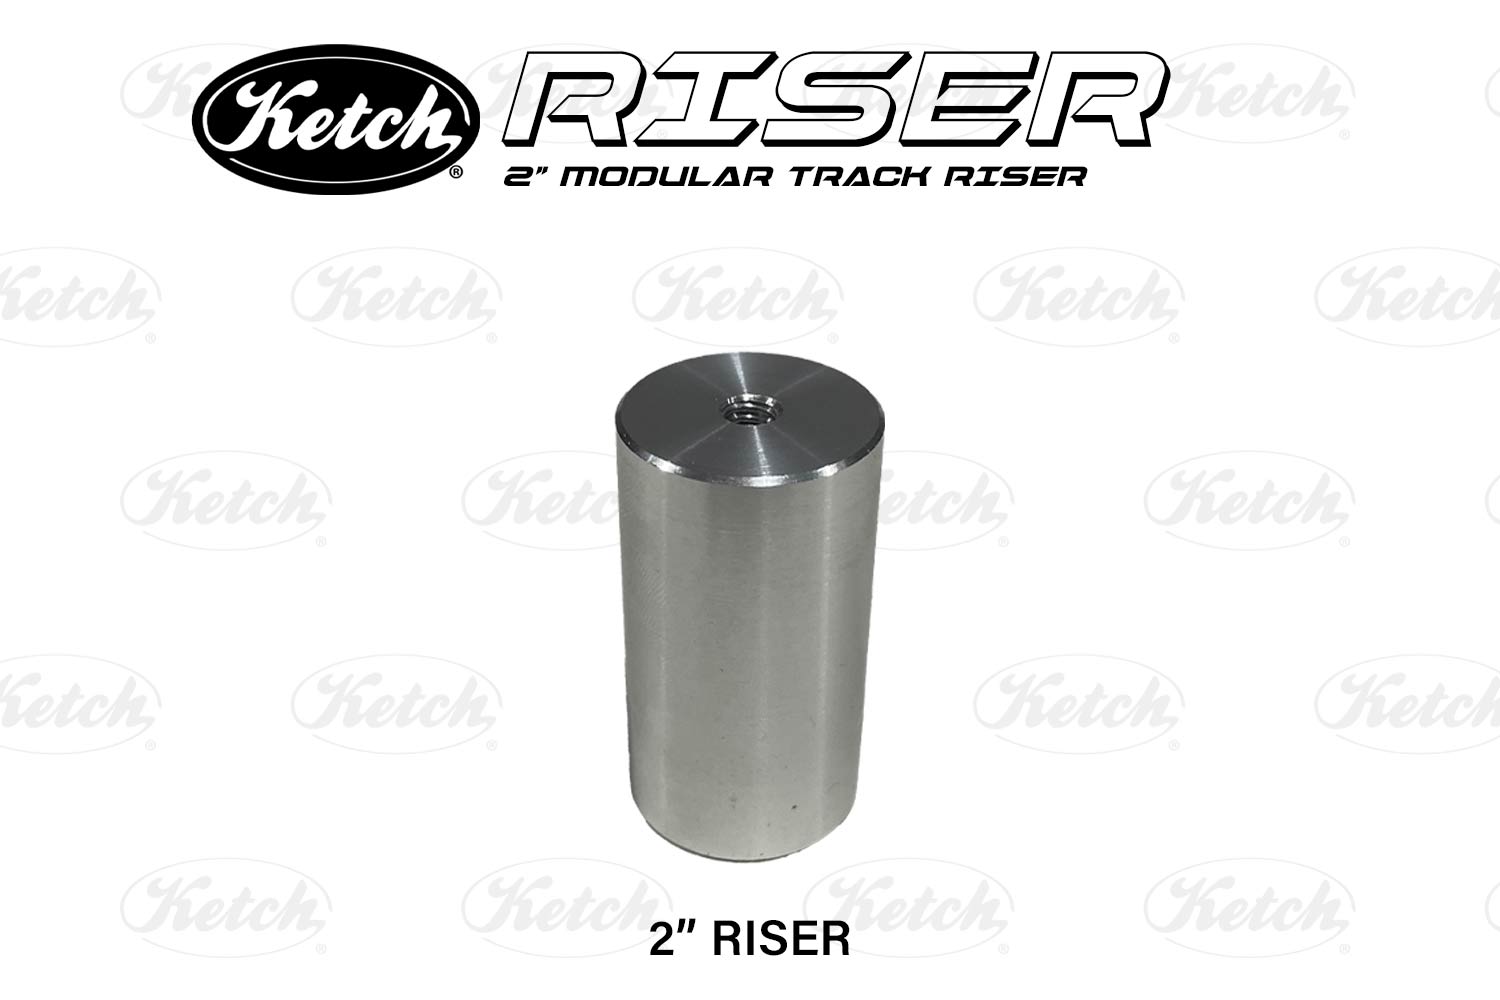 Ketch 2 inch riser for elevating your Ketch Krossbar 2 inches above the mounting surface.